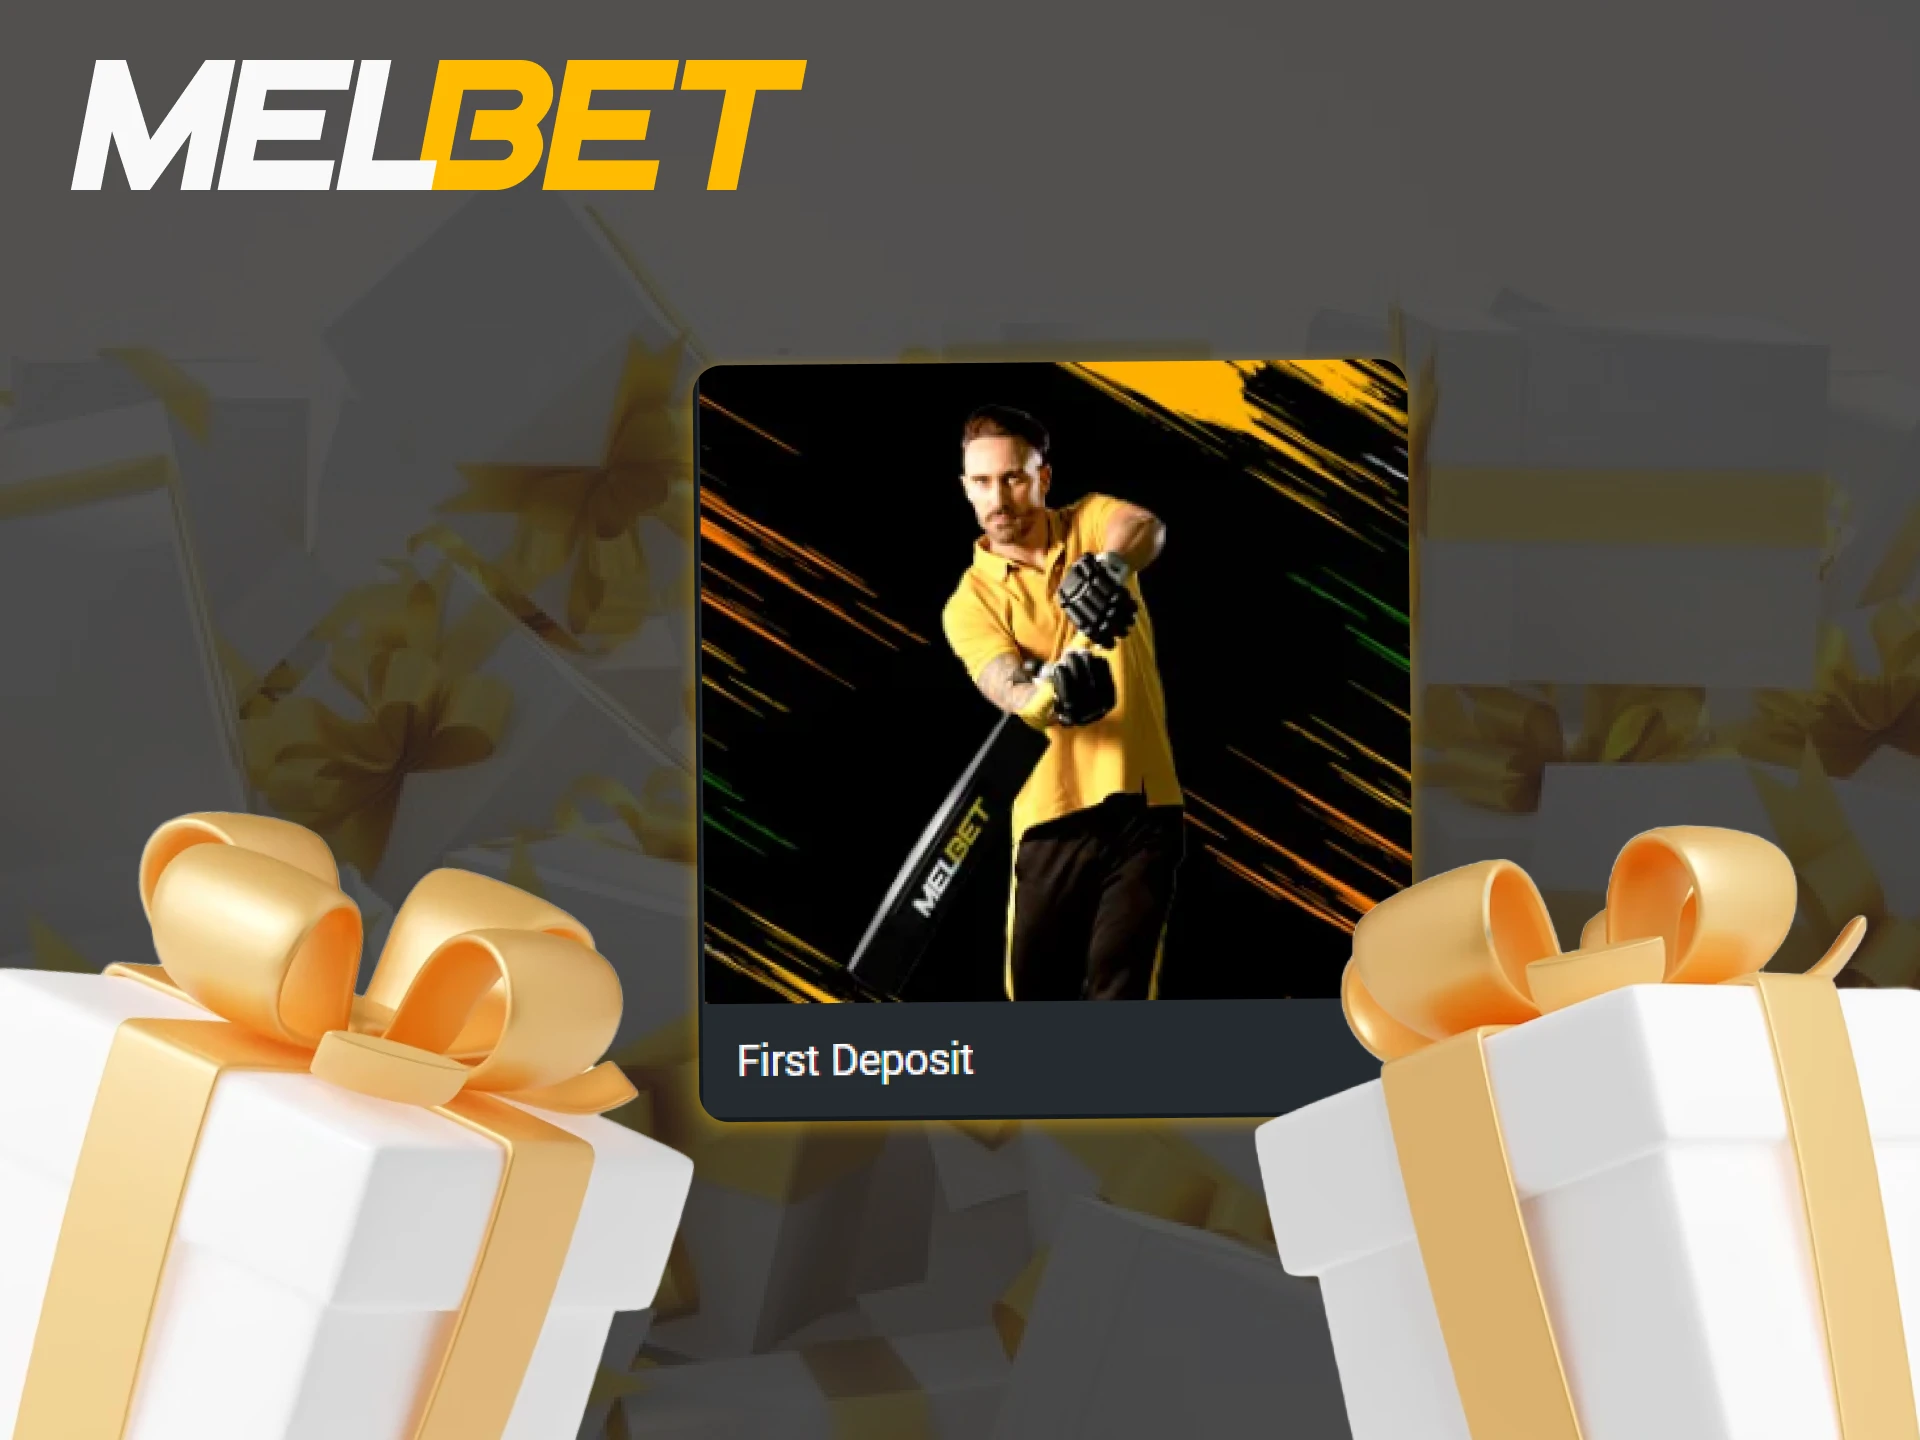 Register with Melbet, make a deposit and receive a lucrative welcome bonus.